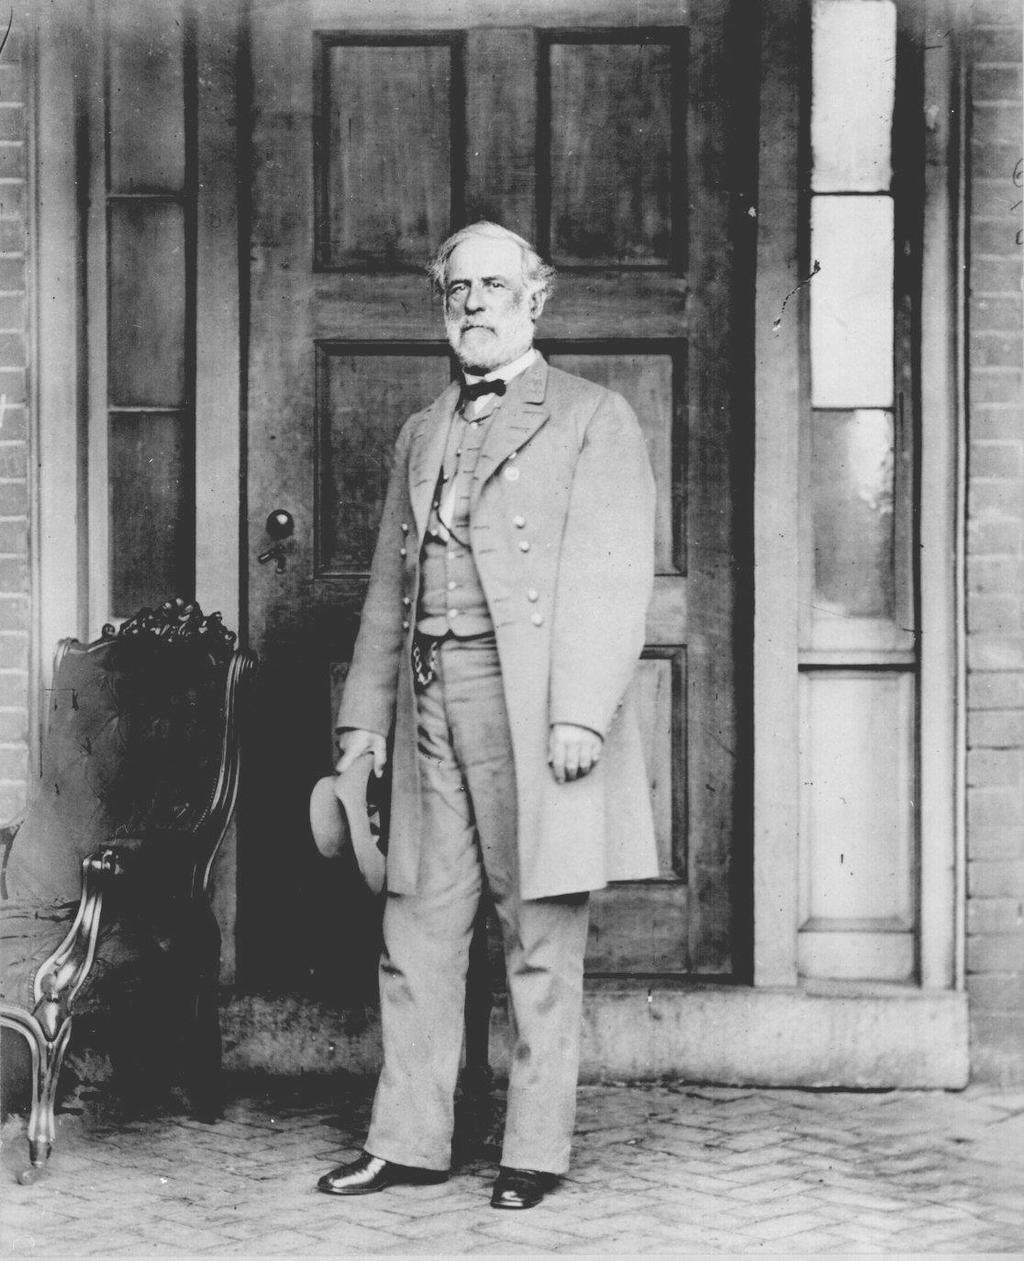 ROBERT E. LEE WAS THE MOST QUALIFIED GENERAL OF THE TIME. LEE WON FAME FOR HIS VICTORIES IN THE MEXICAN- AMERICAN WAR AND ABRAHAM LINCOLN WOULD ASK HIM TO LEAD THE U. S. ARMY IN THE CIVIL WAR.